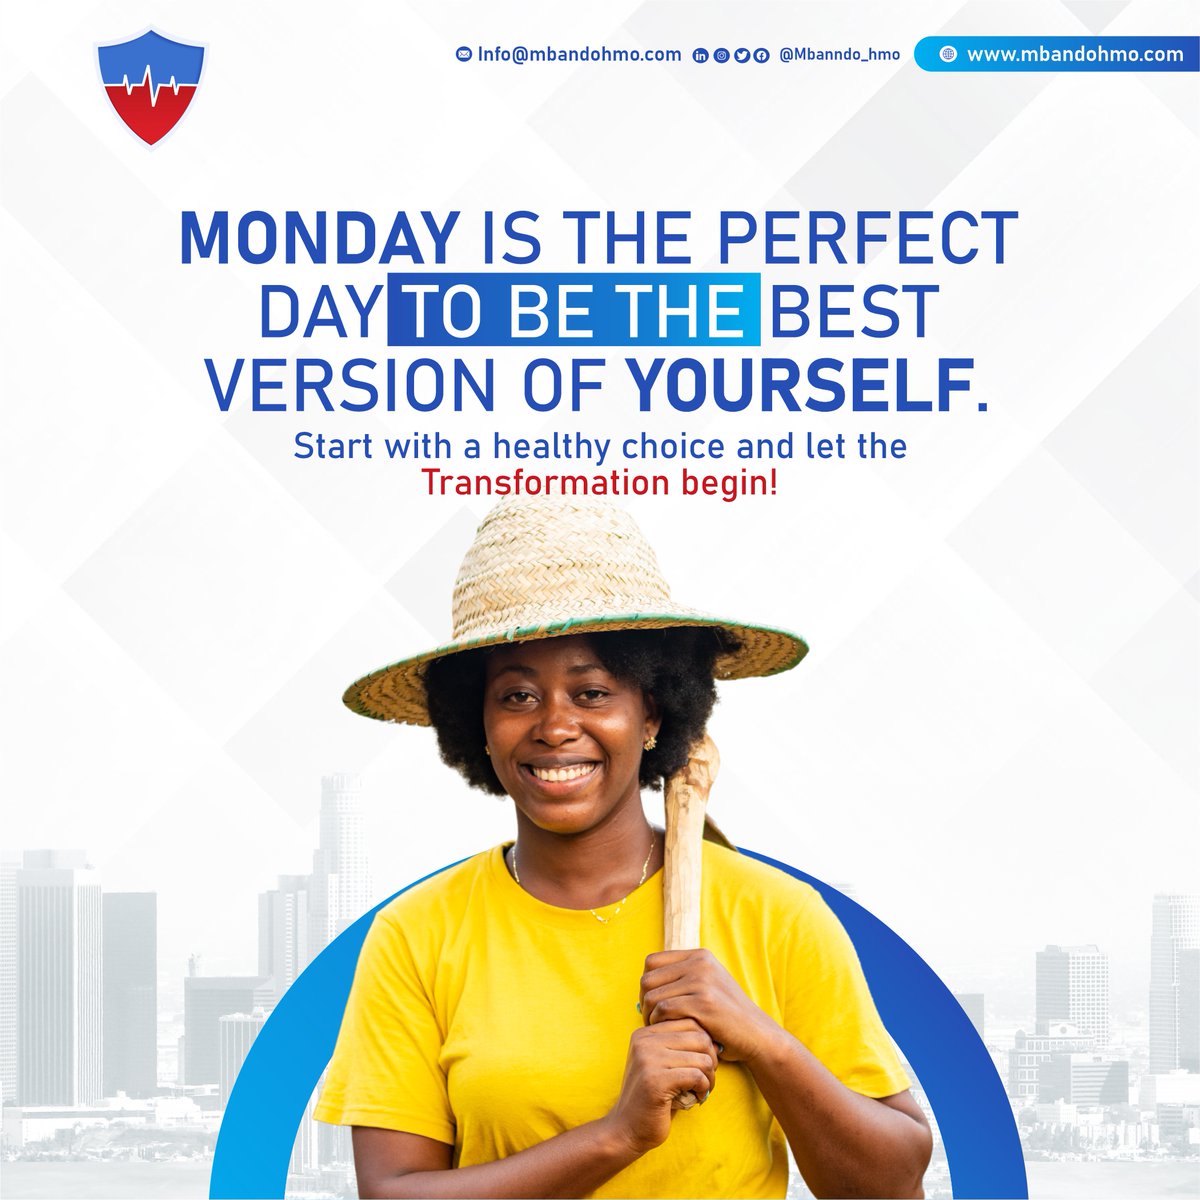 MONDAY IS THE PERFECT DAY TO BE THE BEST VERSION OF YOURSELF. START WITH A HEALTHY CHOICE AND LET THE TRANSFORMATION BEGIN! 
#mondaymotivation #healthychoice #mbandohmo #mbandocare #healthcare #wellness